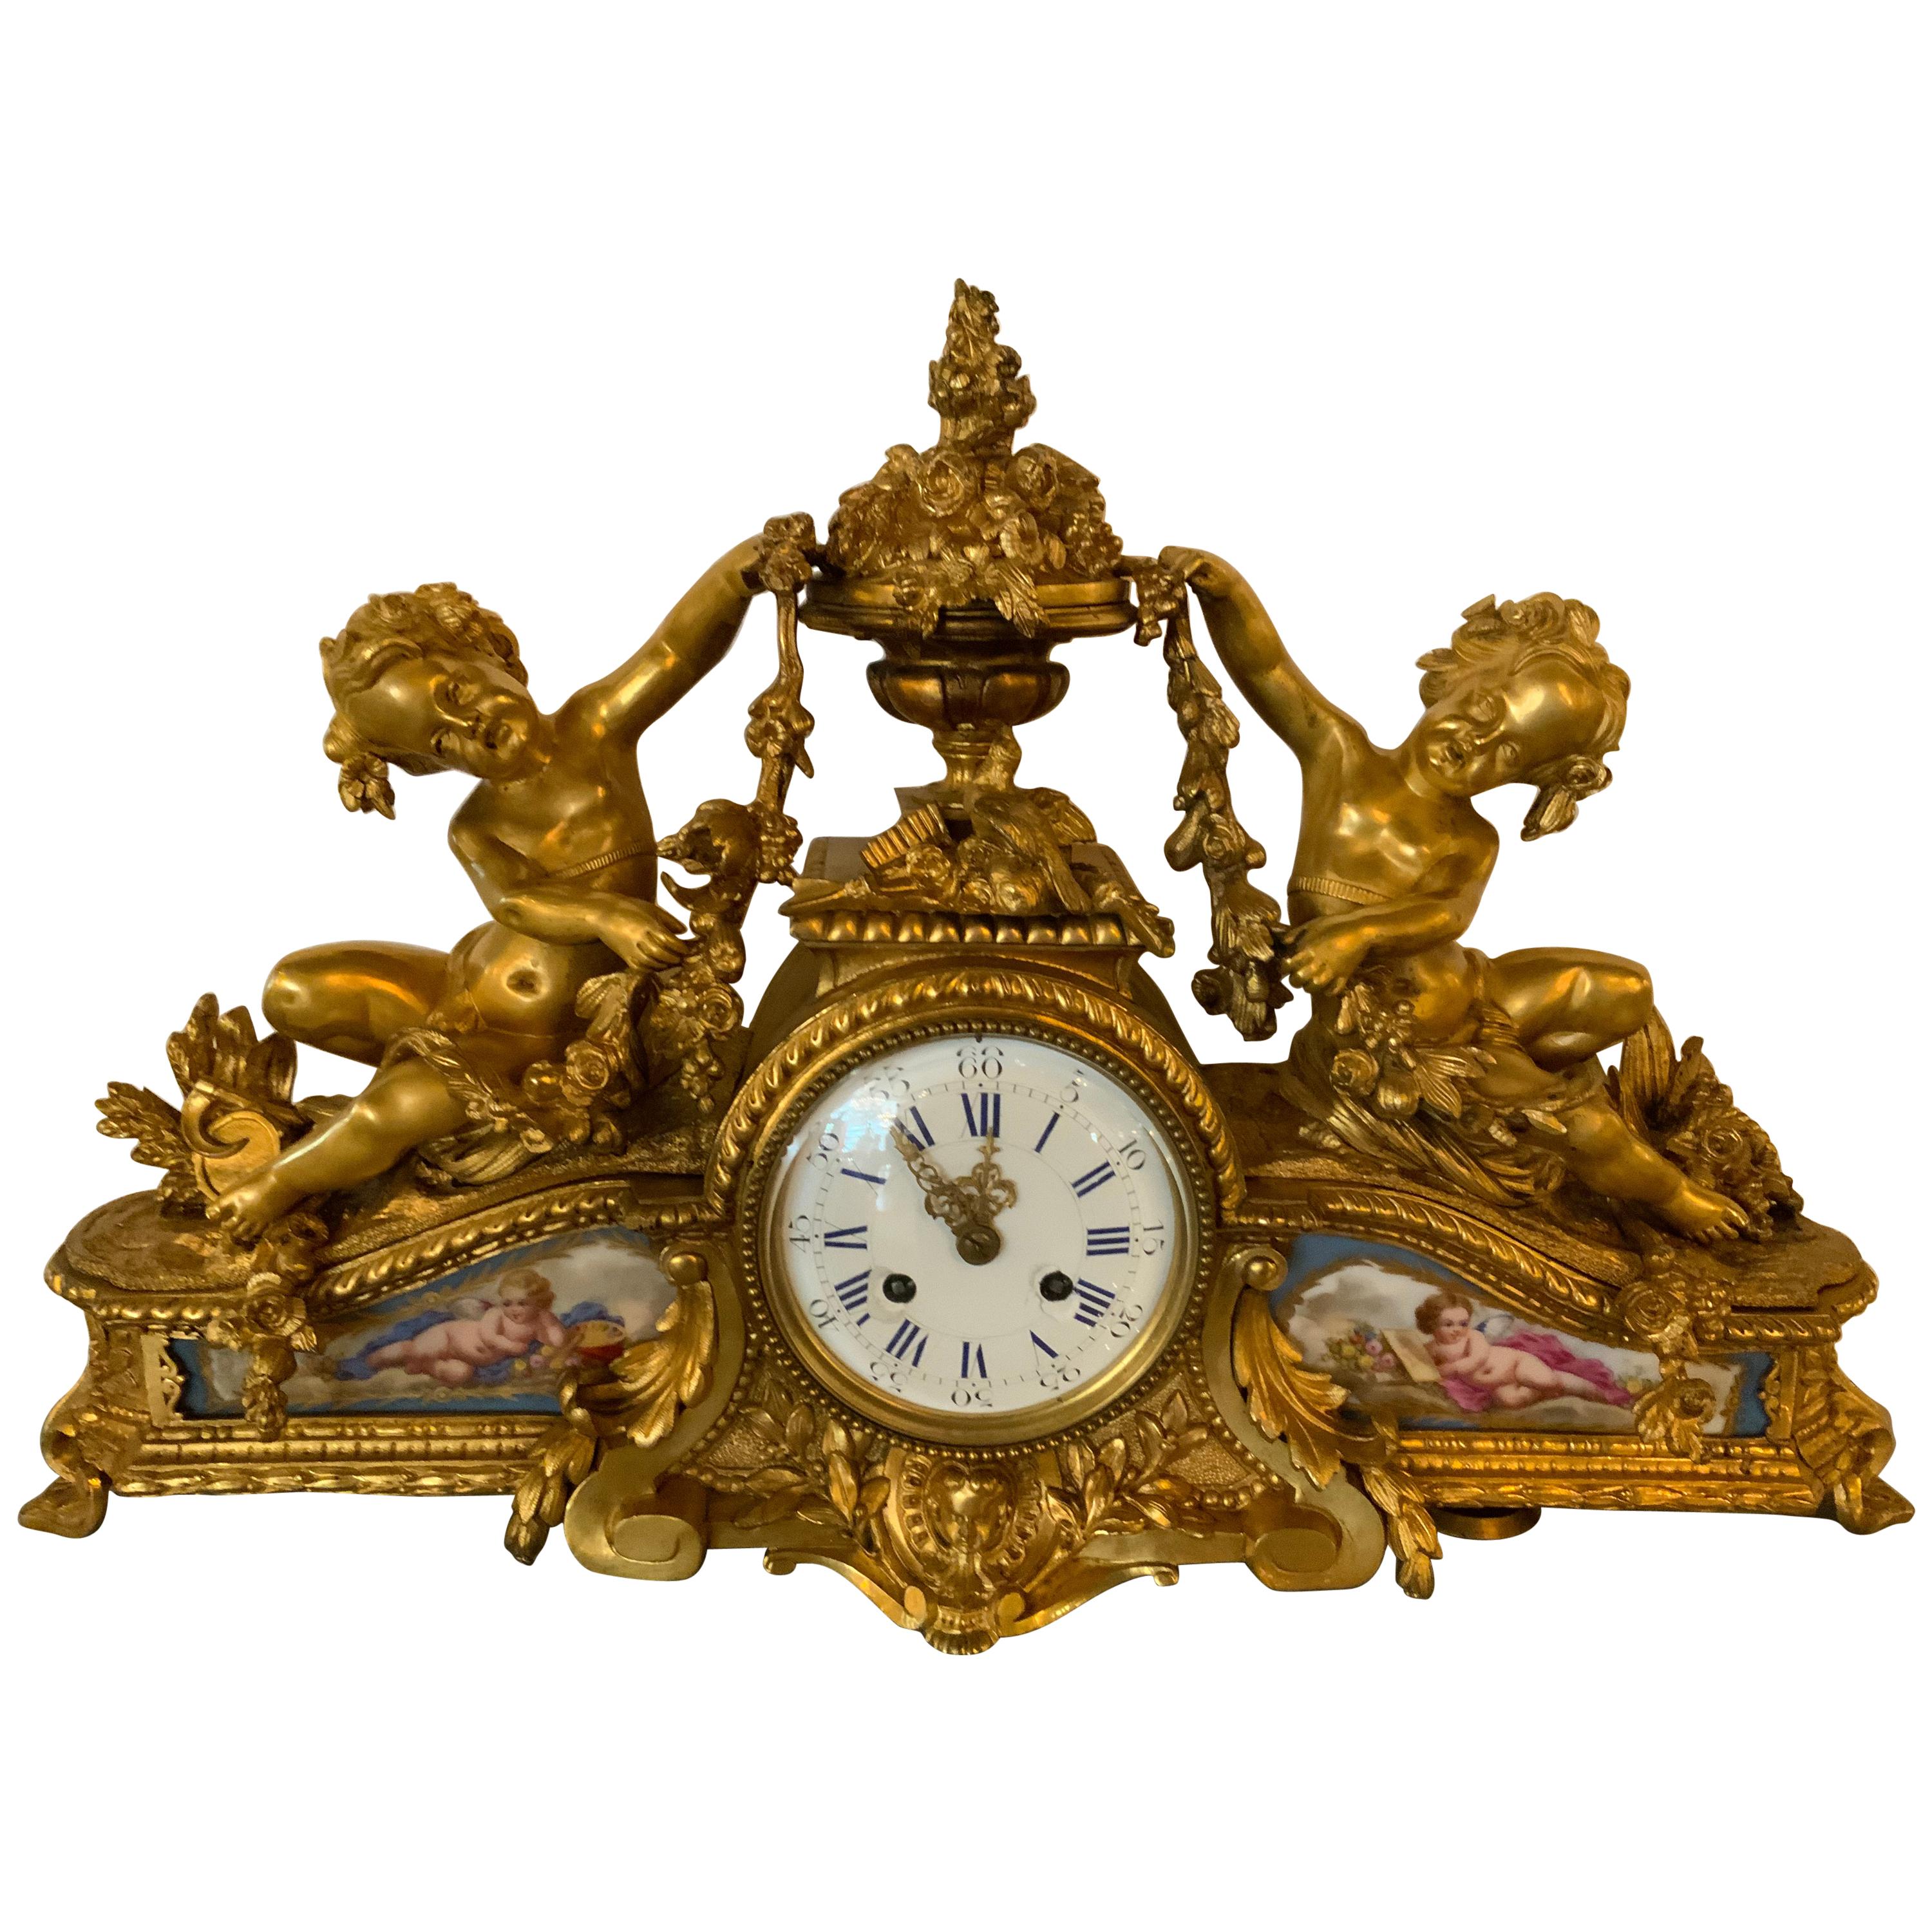 French Bronze Dore Mantel Clock with Cherubs, Sevres Style Mounts